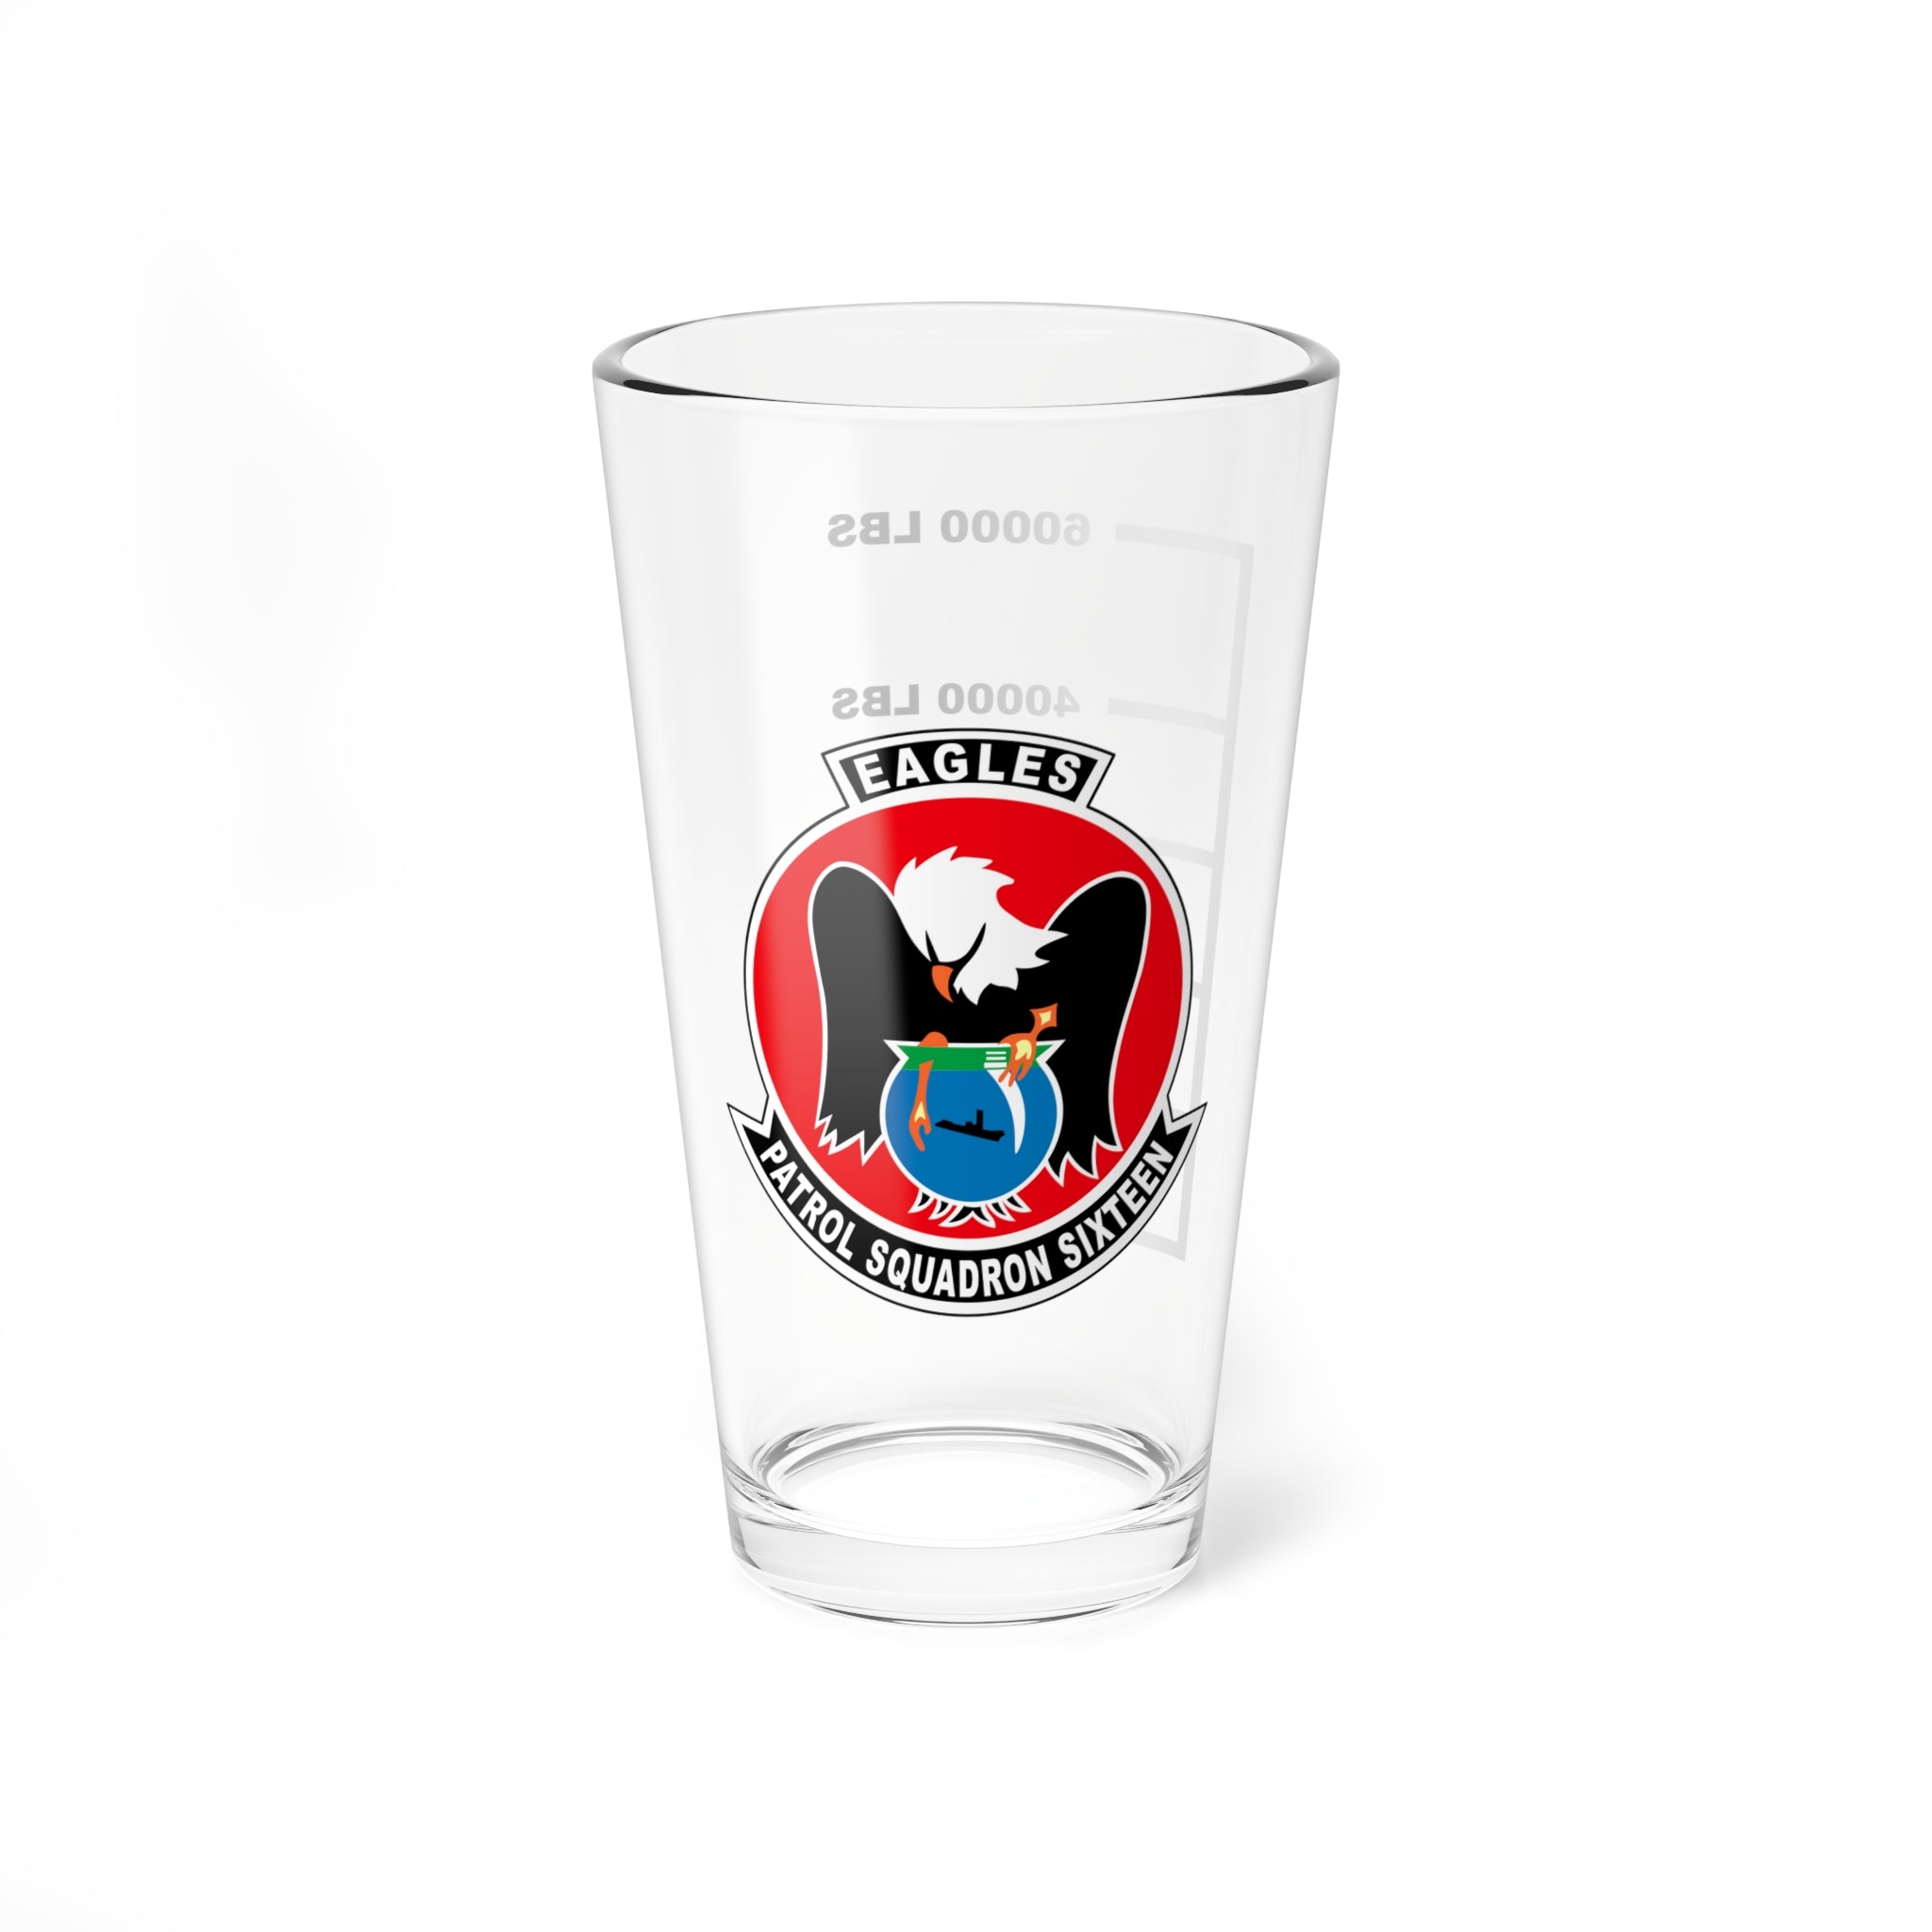 VP-16 "War Eagles" Fuel Low Pint Glass, Navy Maritime Patrol Squadron flying the P-3 Orion and P-8 Poseidon